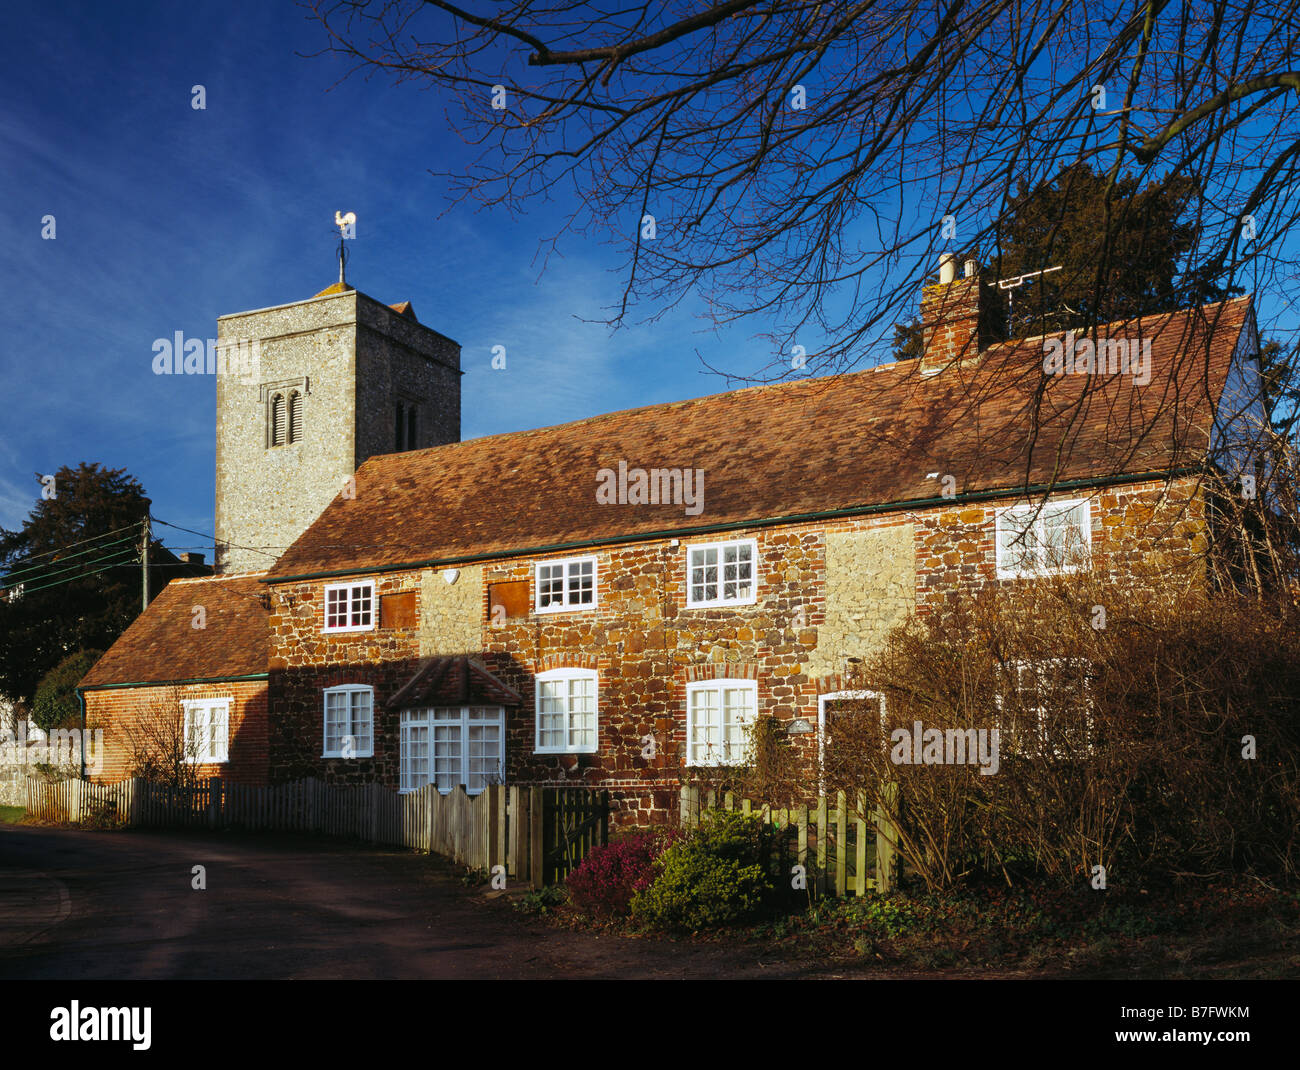 Cottages in front of the church of St Peter St Paul Trottiscliffe, West Malling, Kent, England, UK. Stock Photo